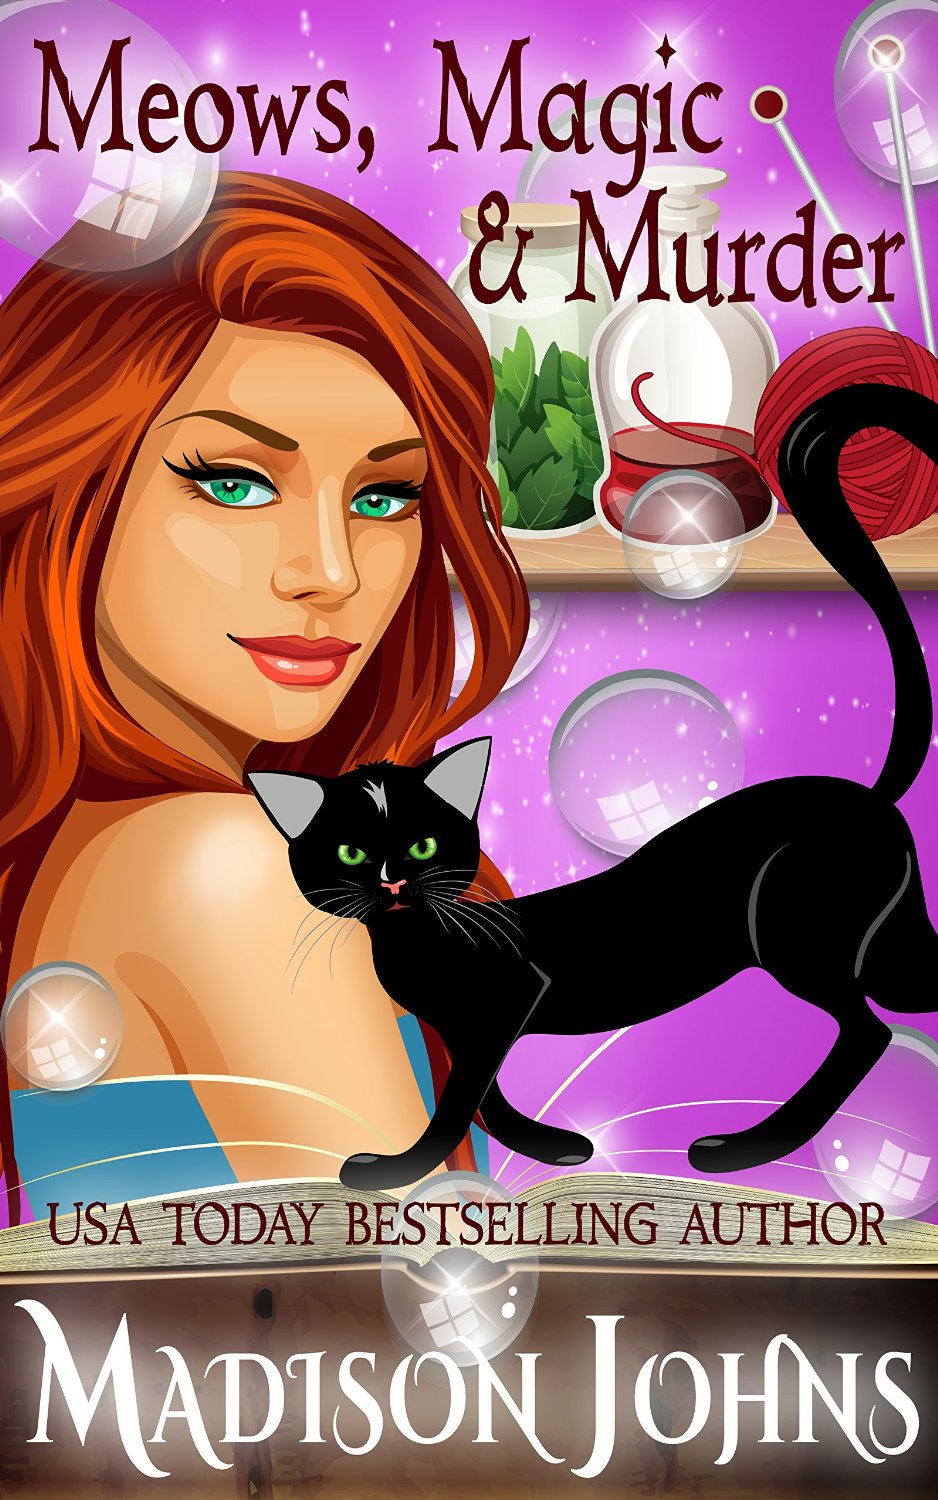 Meows, Magic & Murder (Lake Forest Witches Book 1) by Madison Johns